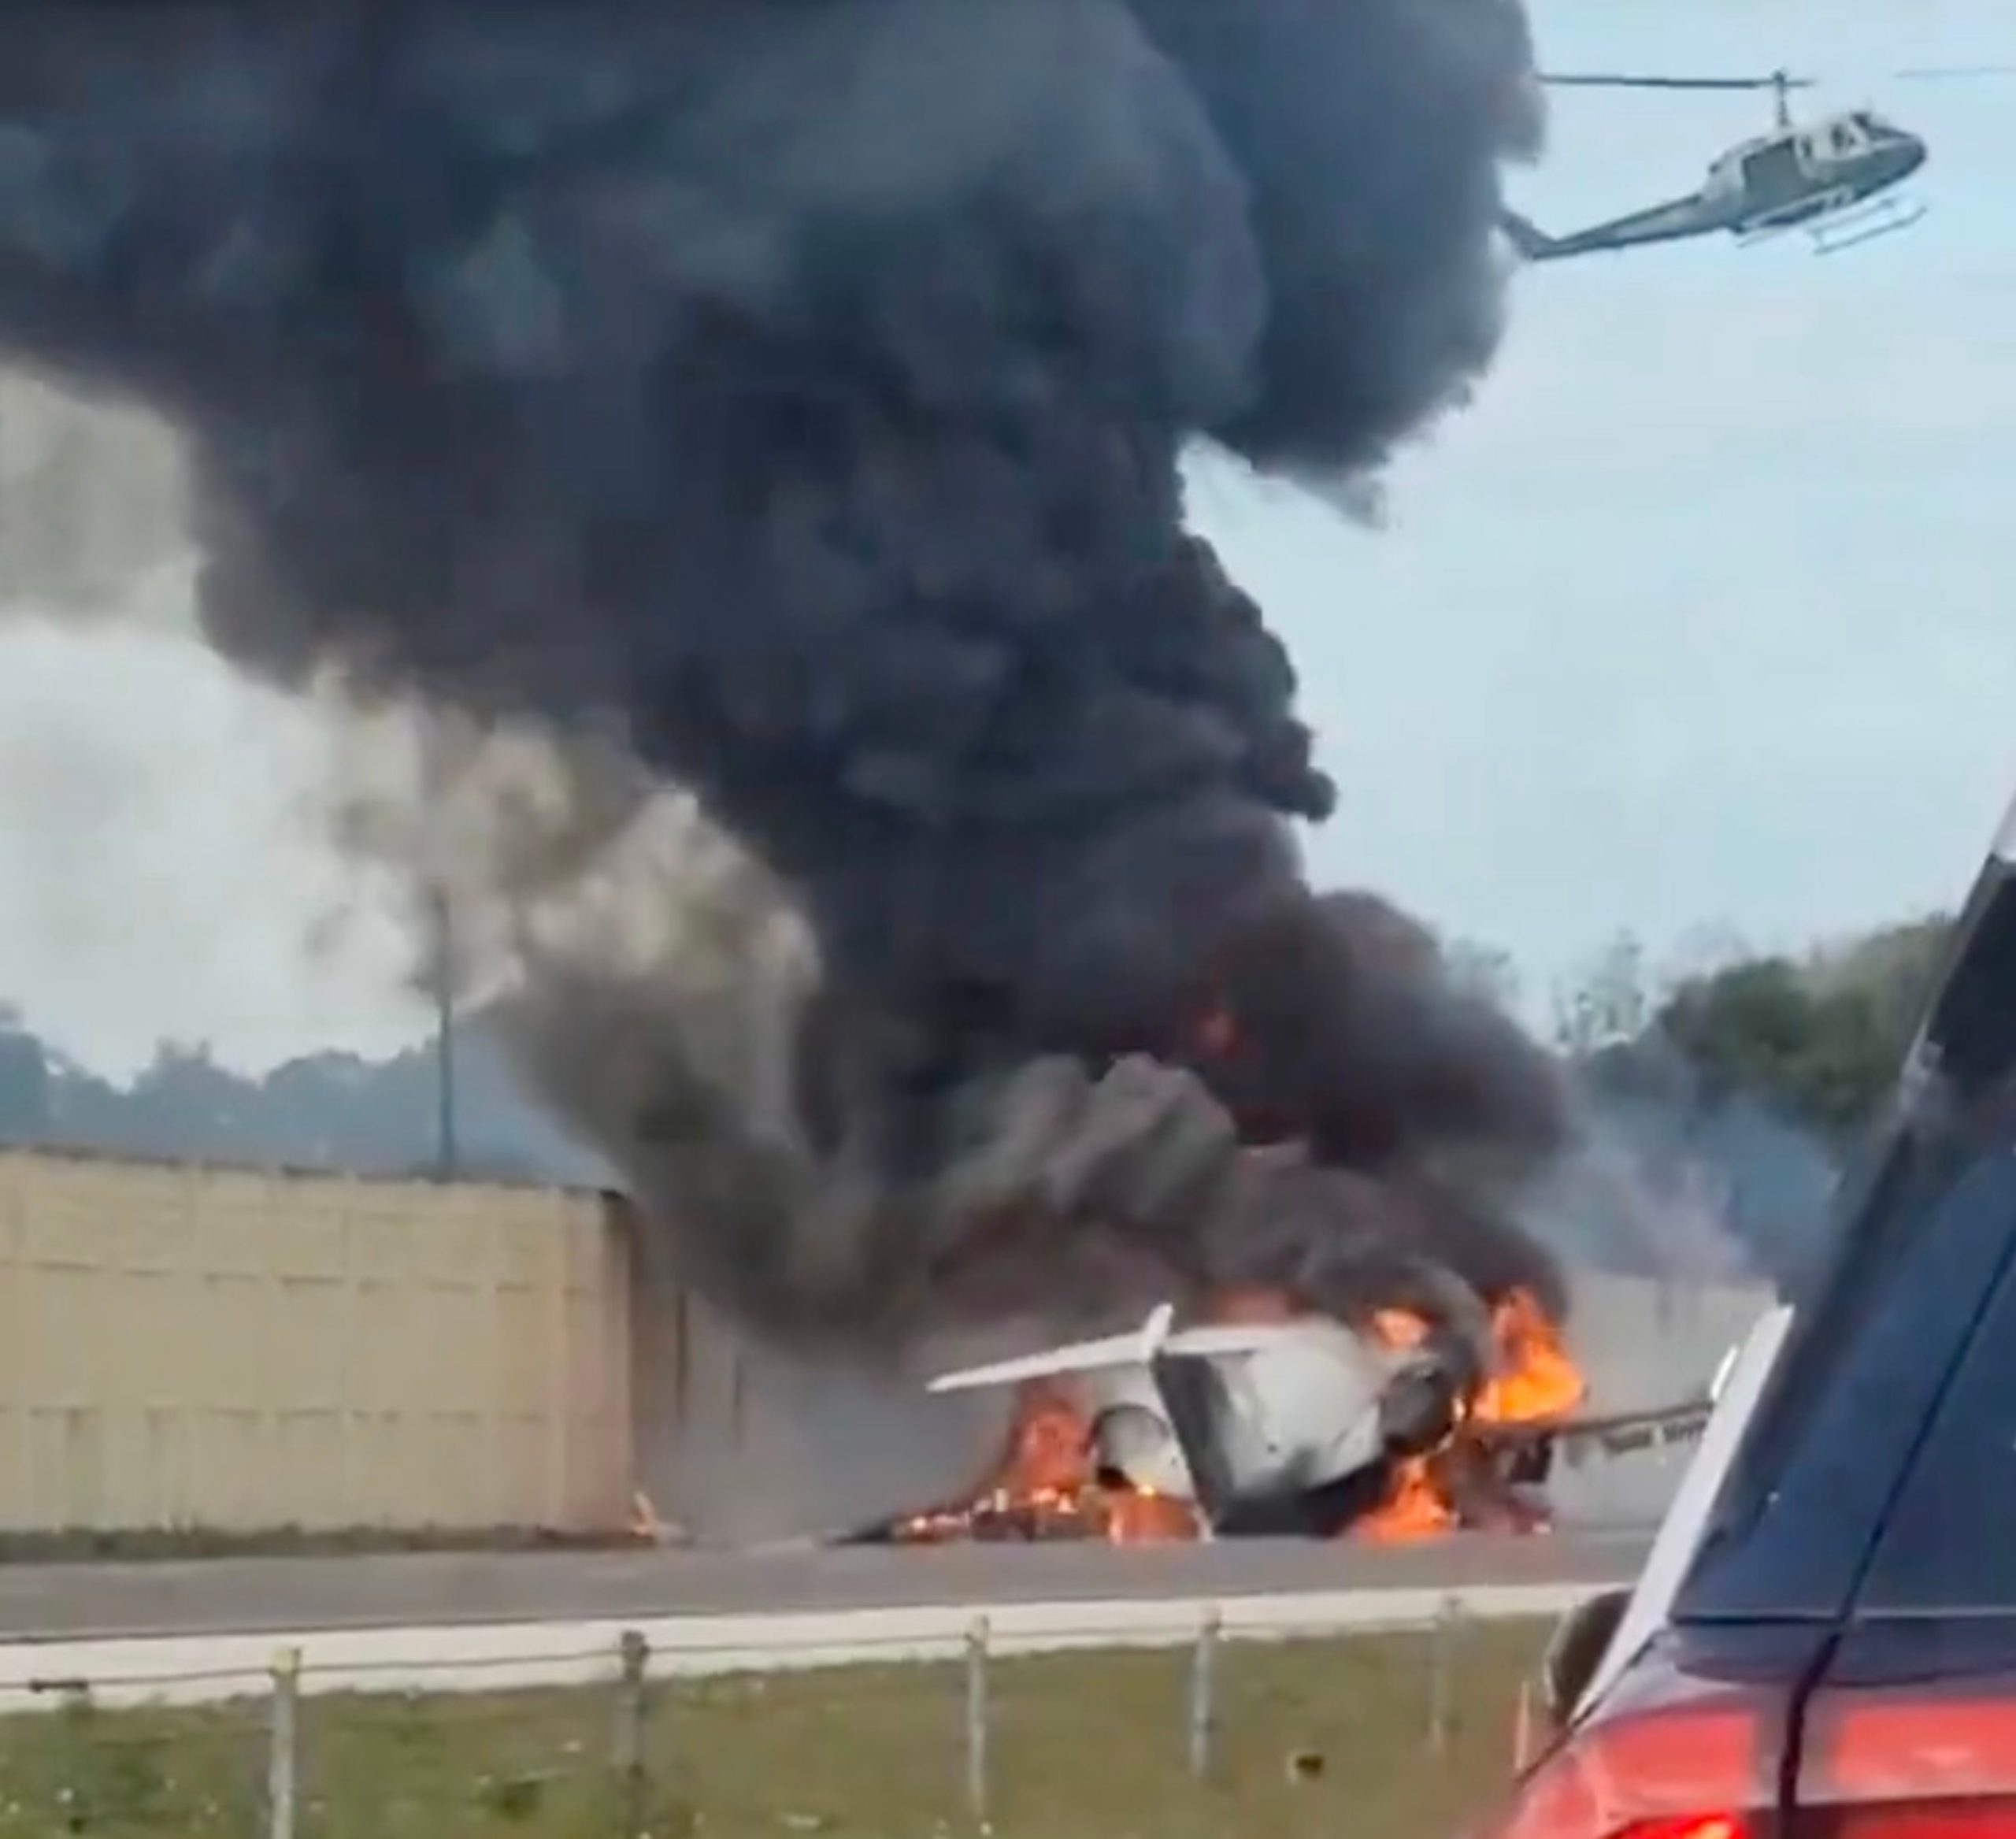 Authorities report multiple fatalities following small plane crash on Florida highway